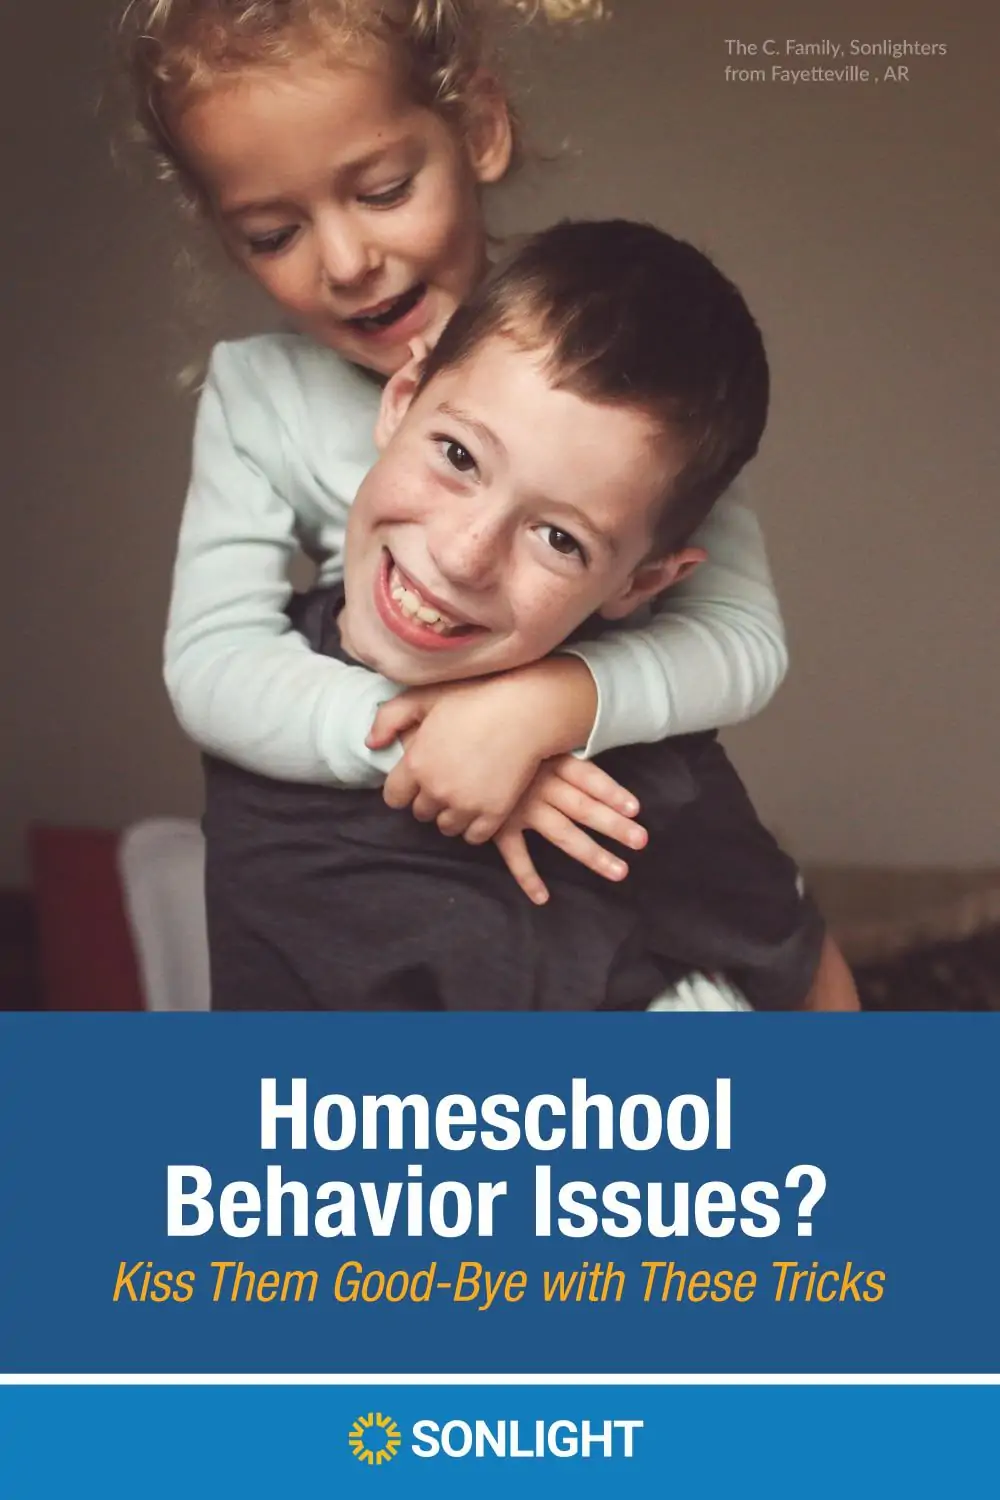 Homeschool Behavior Issues? Kiss Them Good-Bye with These Tricks